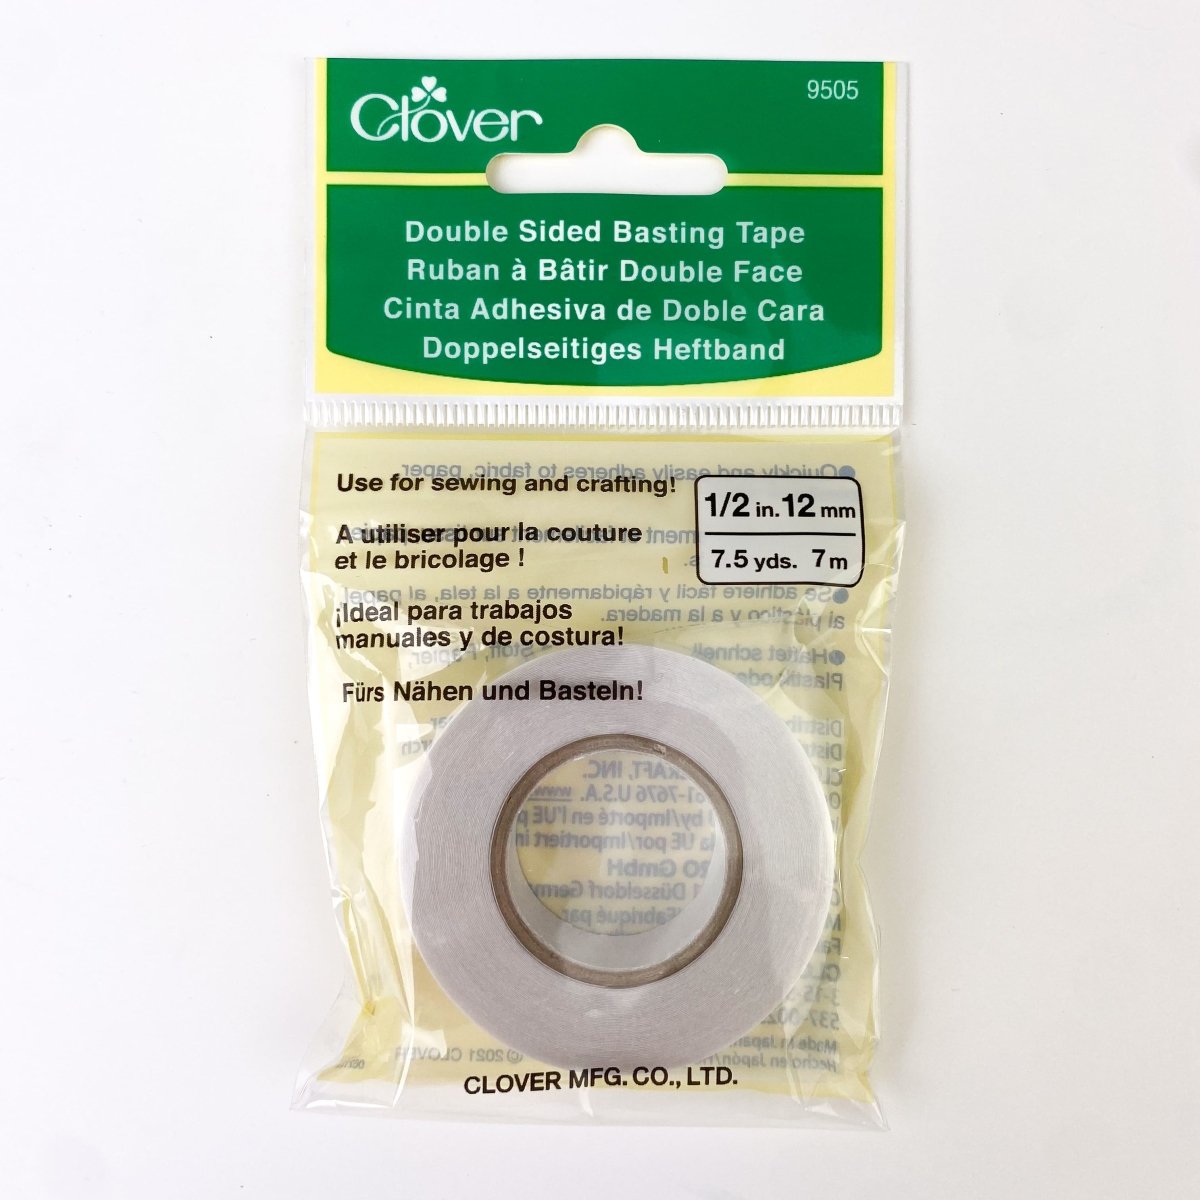 The Double-Sided Basting Tape quickly and easily adheres to plastic, paper,  fabric and wood.